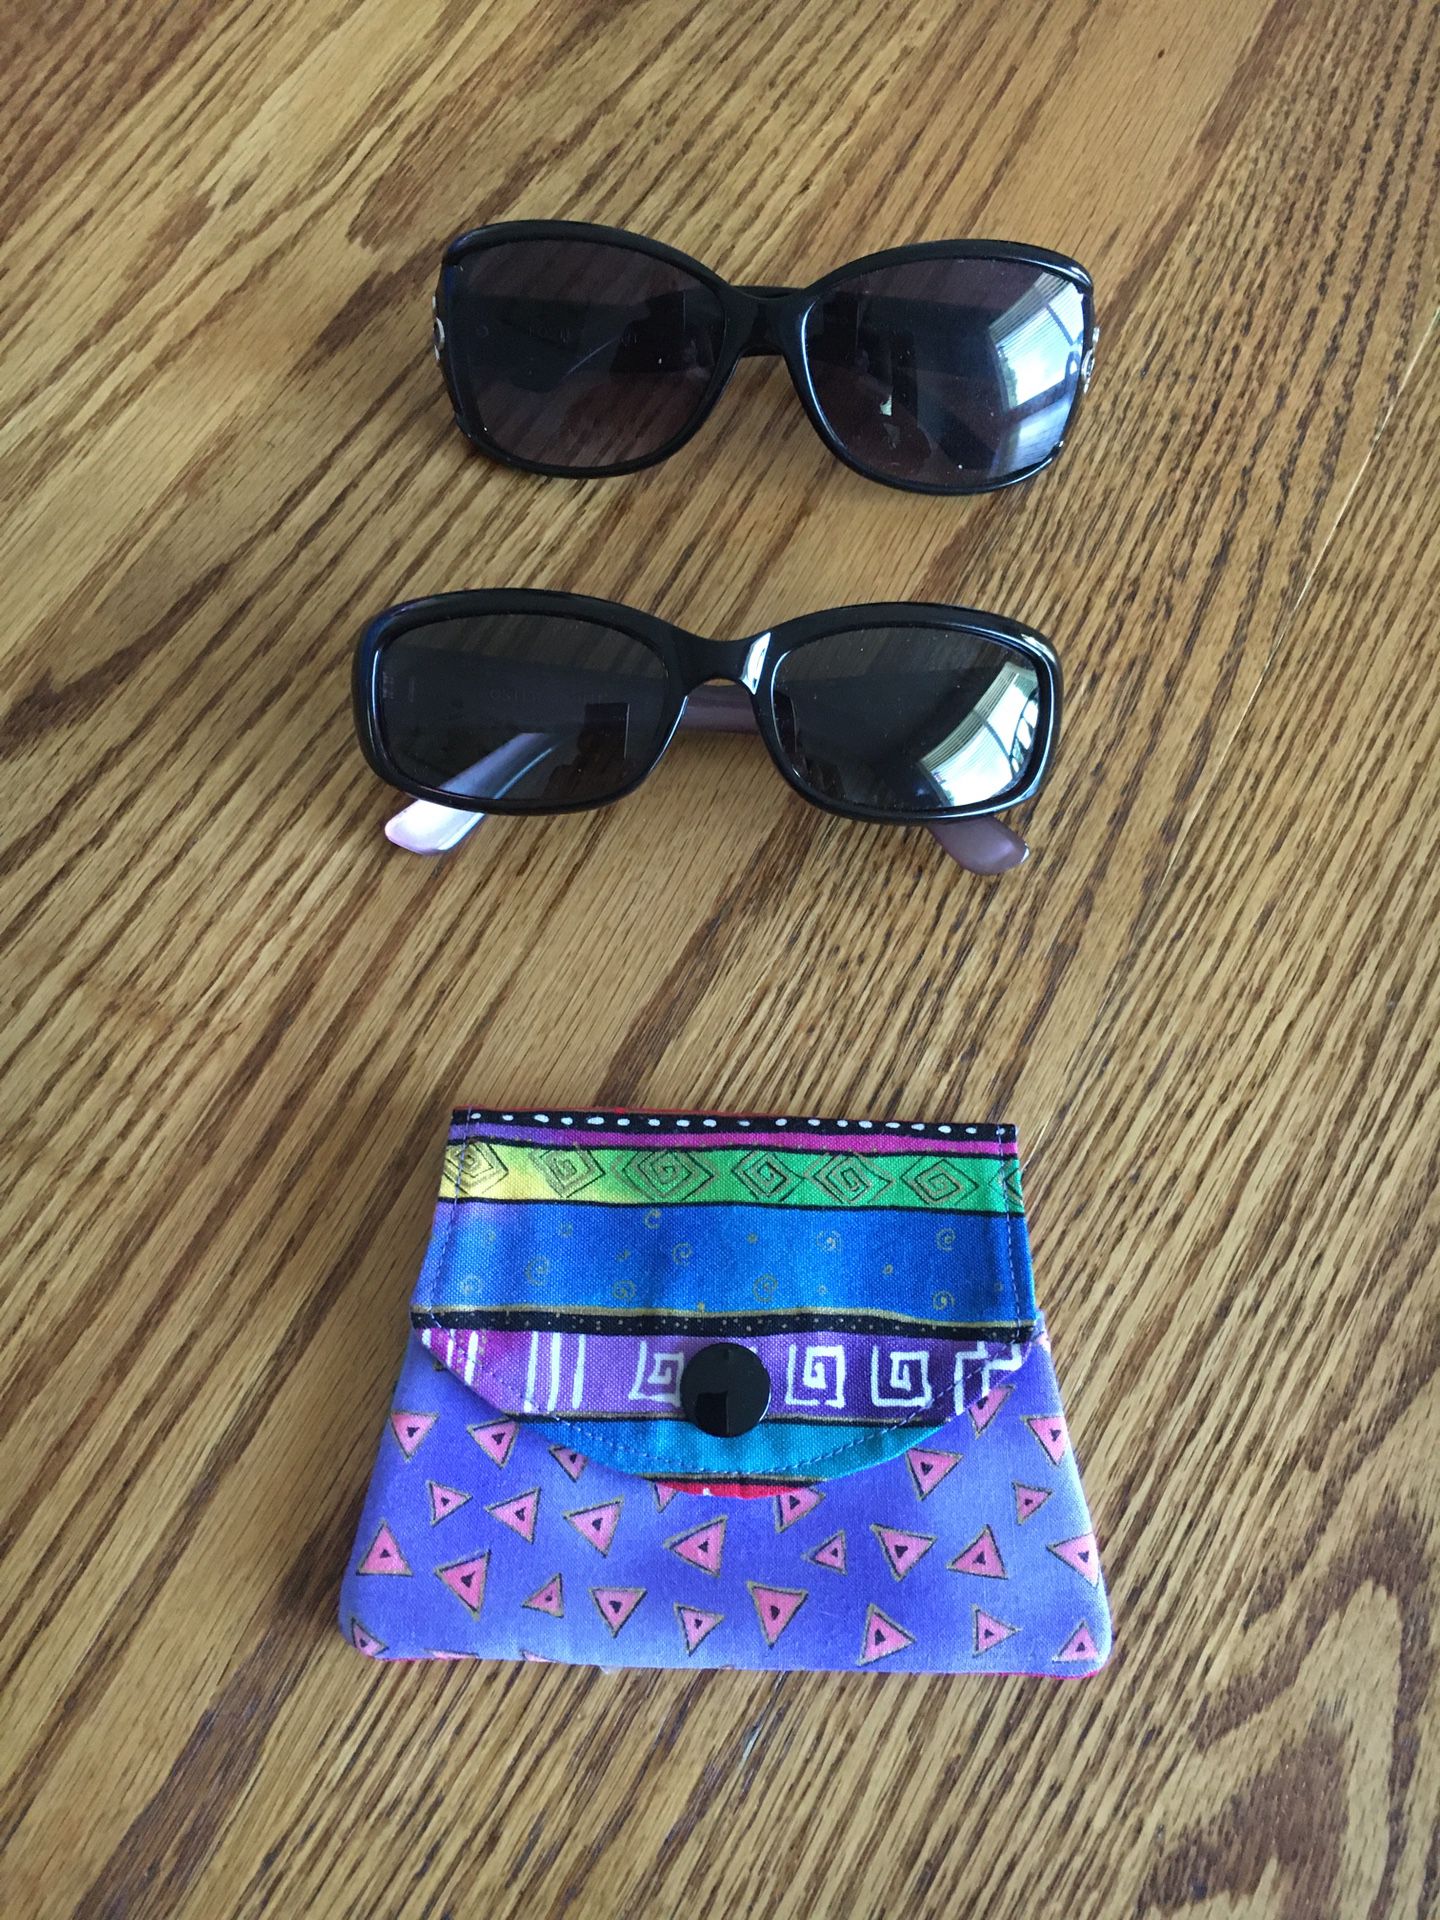 Two Pair of Sunglasses and new coin purse